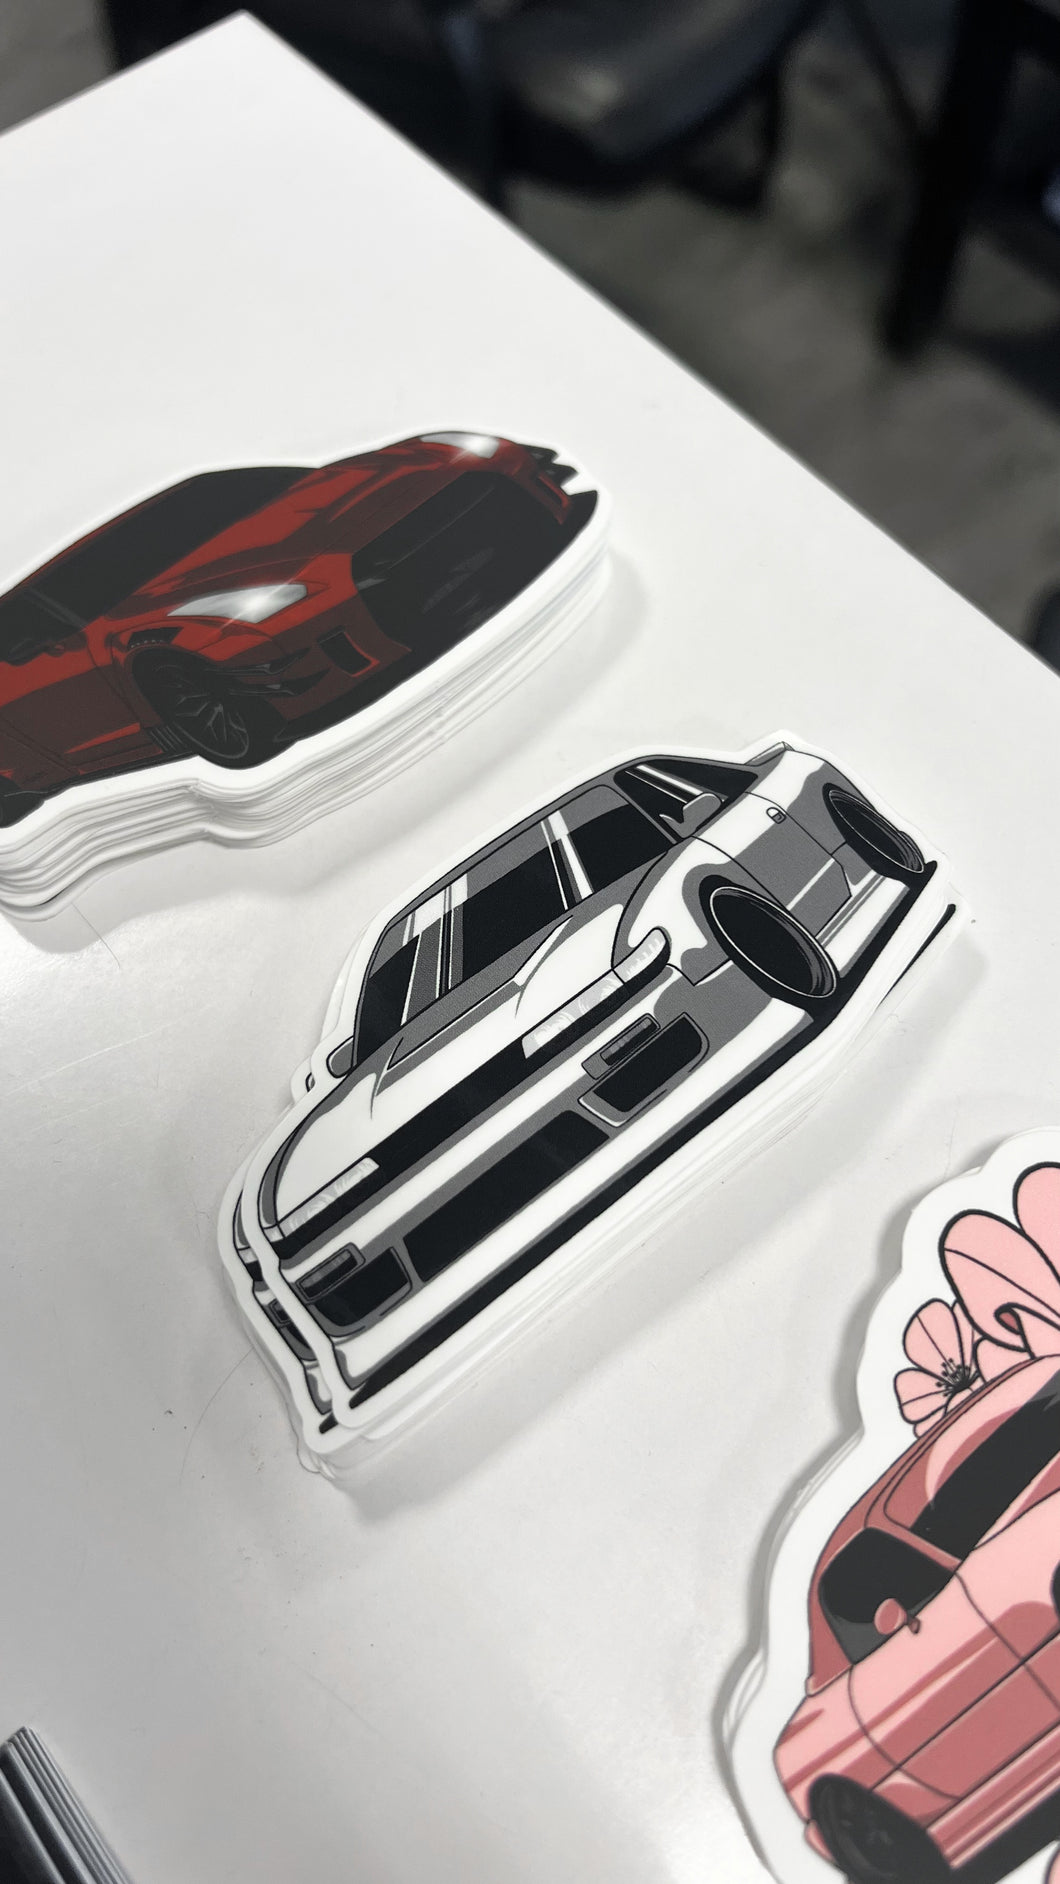 S13 Decal